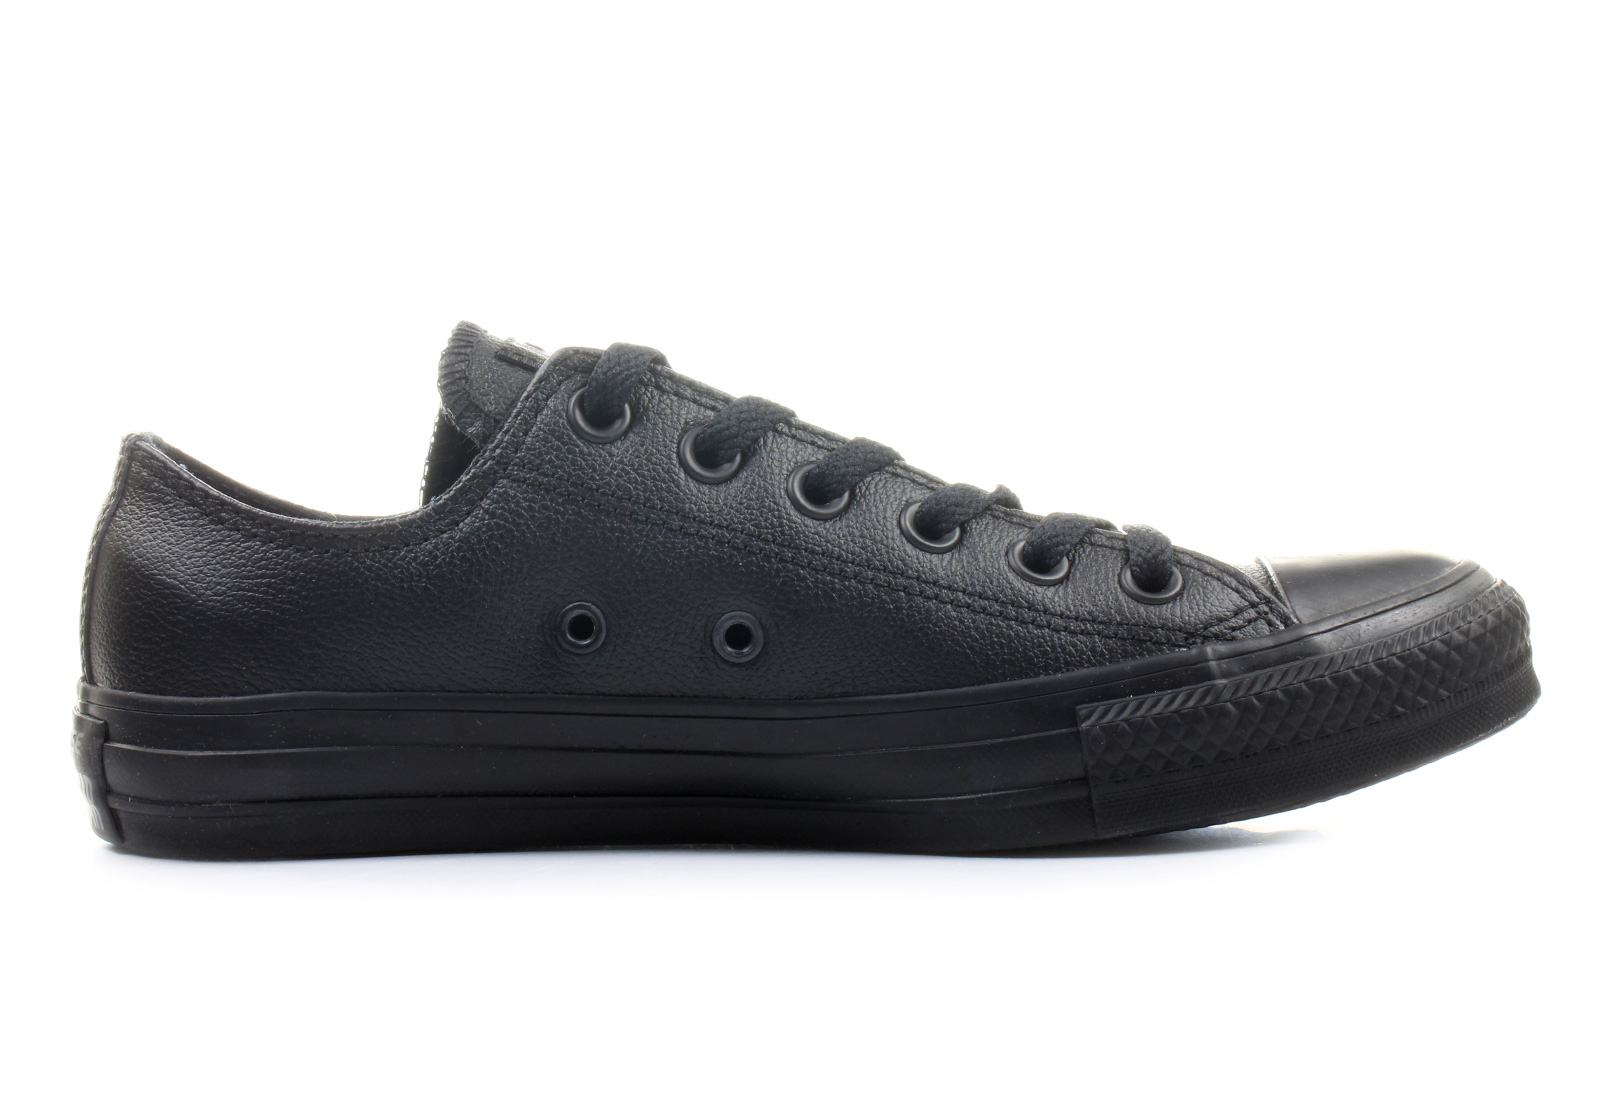 Converse Sneakers - Chuck Taylor All Star Leather Ox - 135253C - Online ...